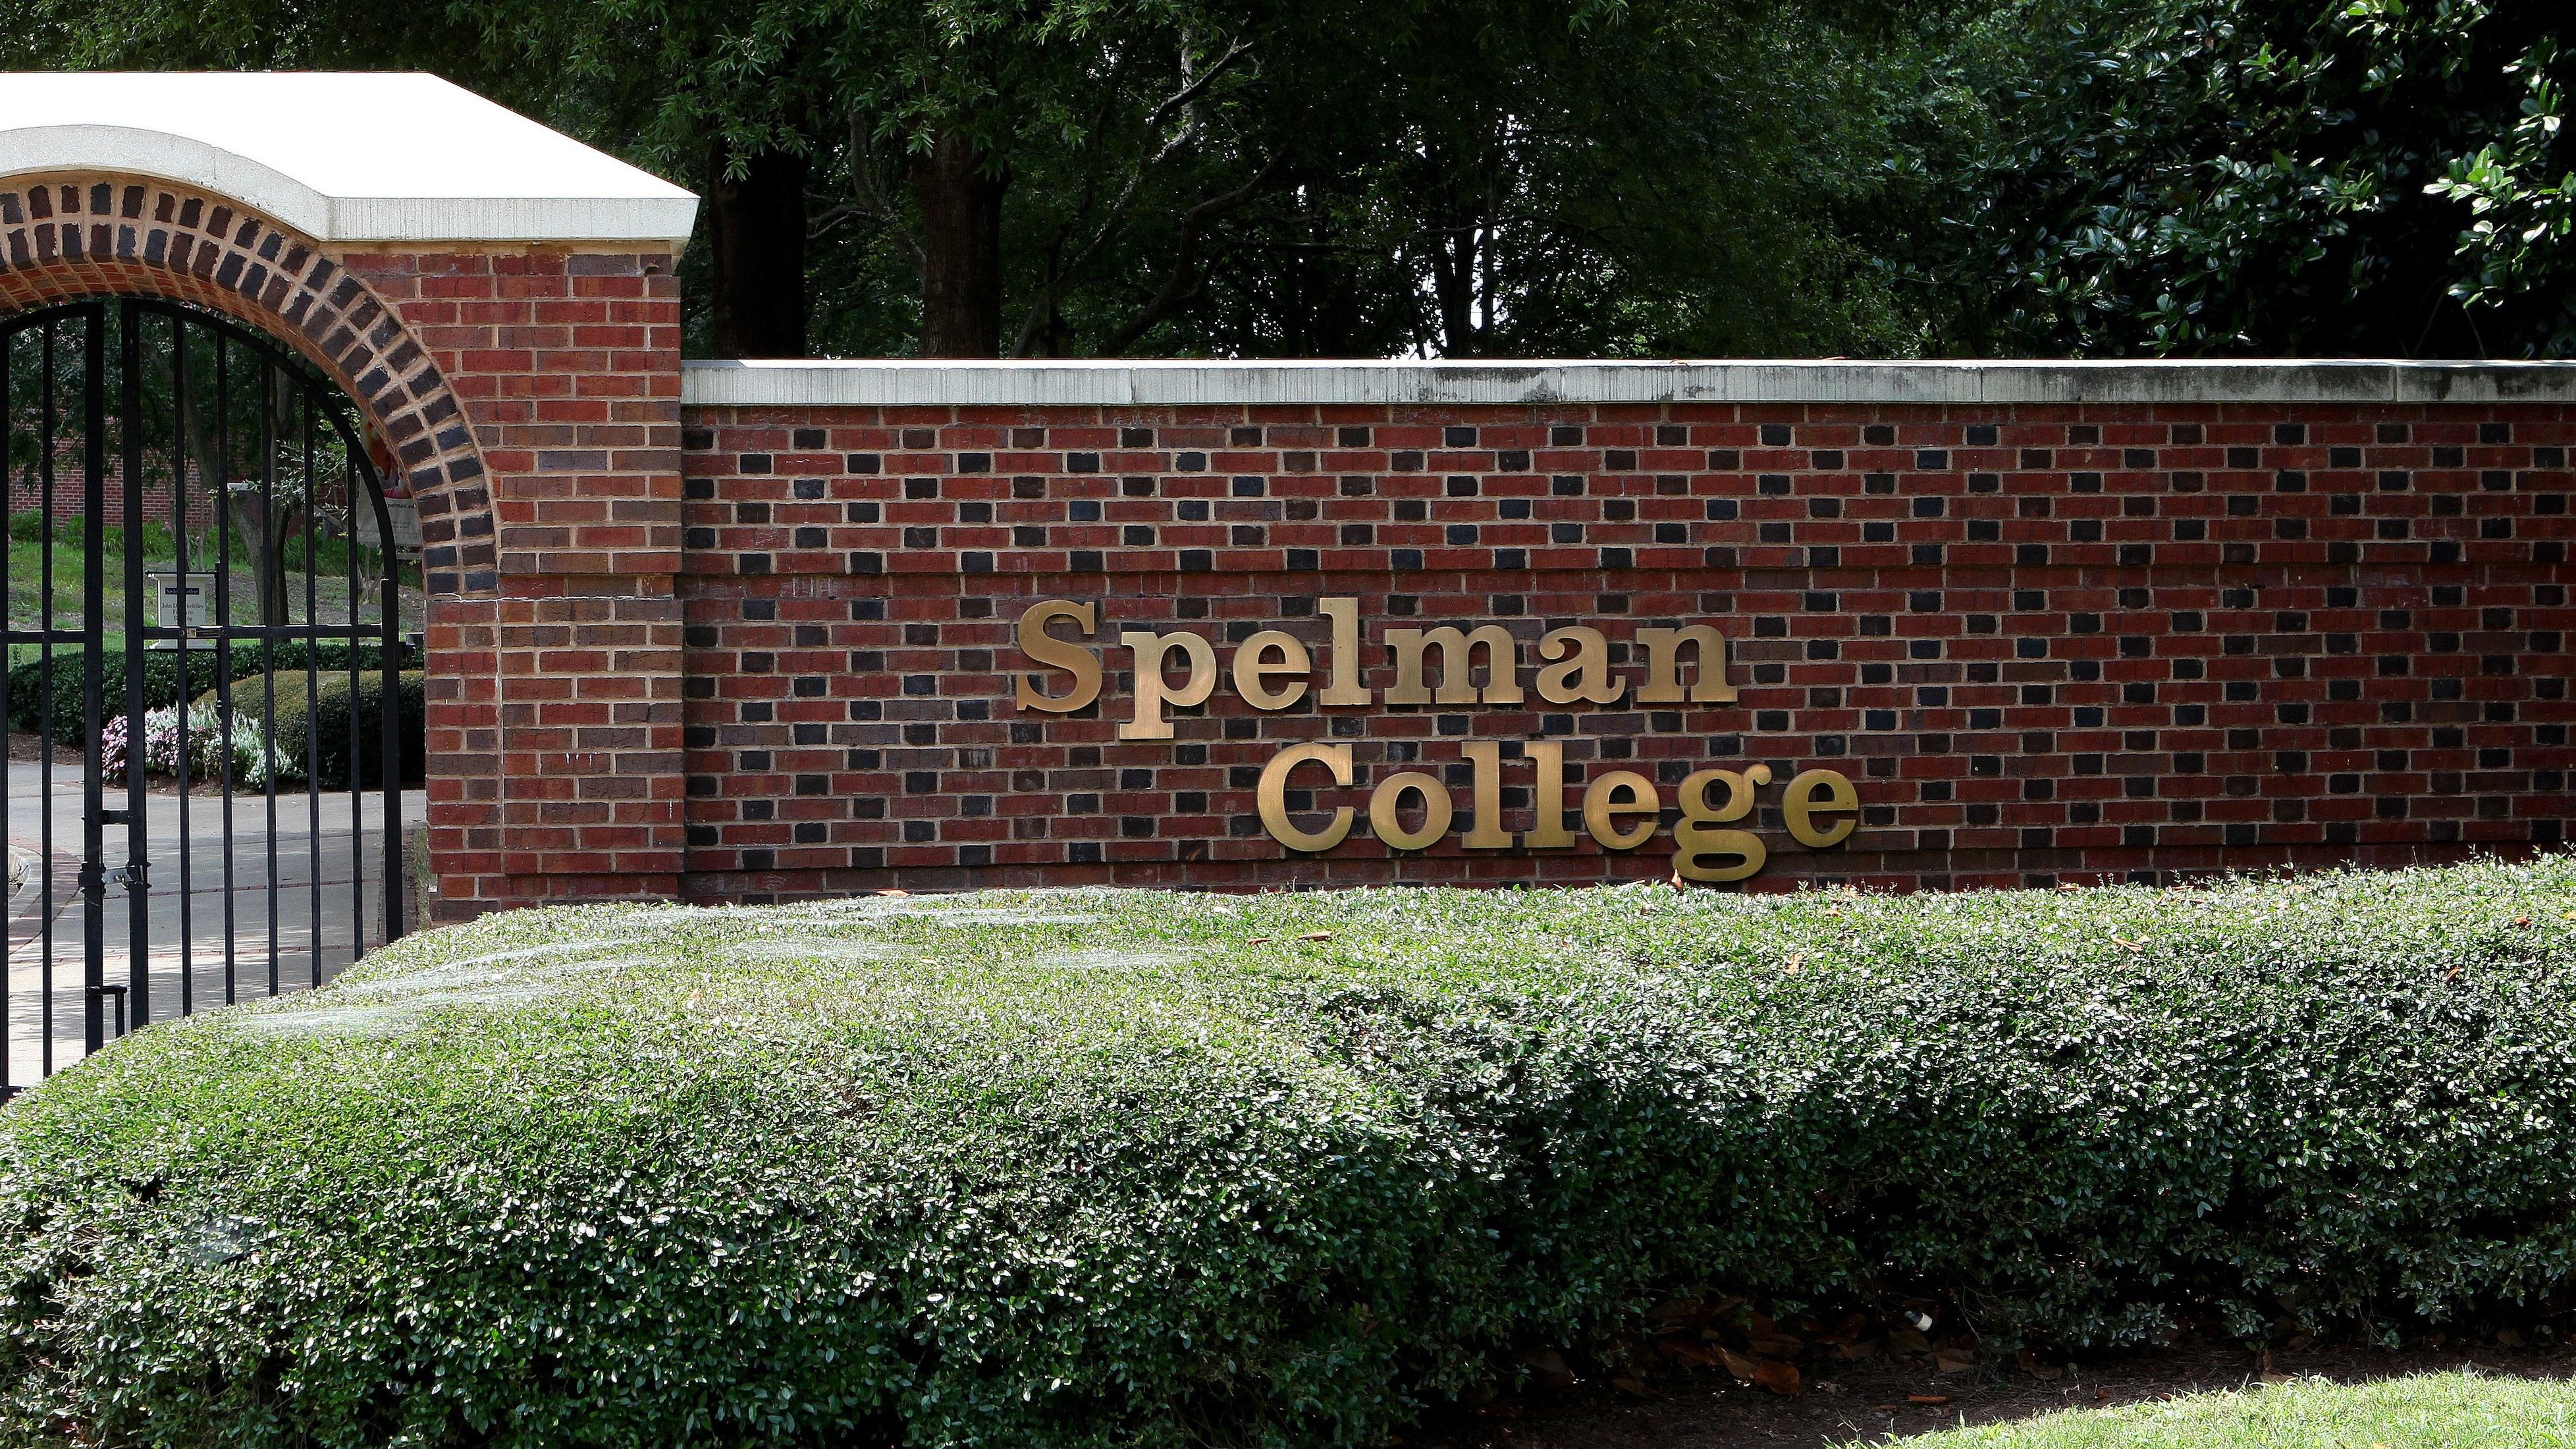 Atlanta’s Spelman College Among HBCUs Targeted On Day 2 Of Bomb Threats